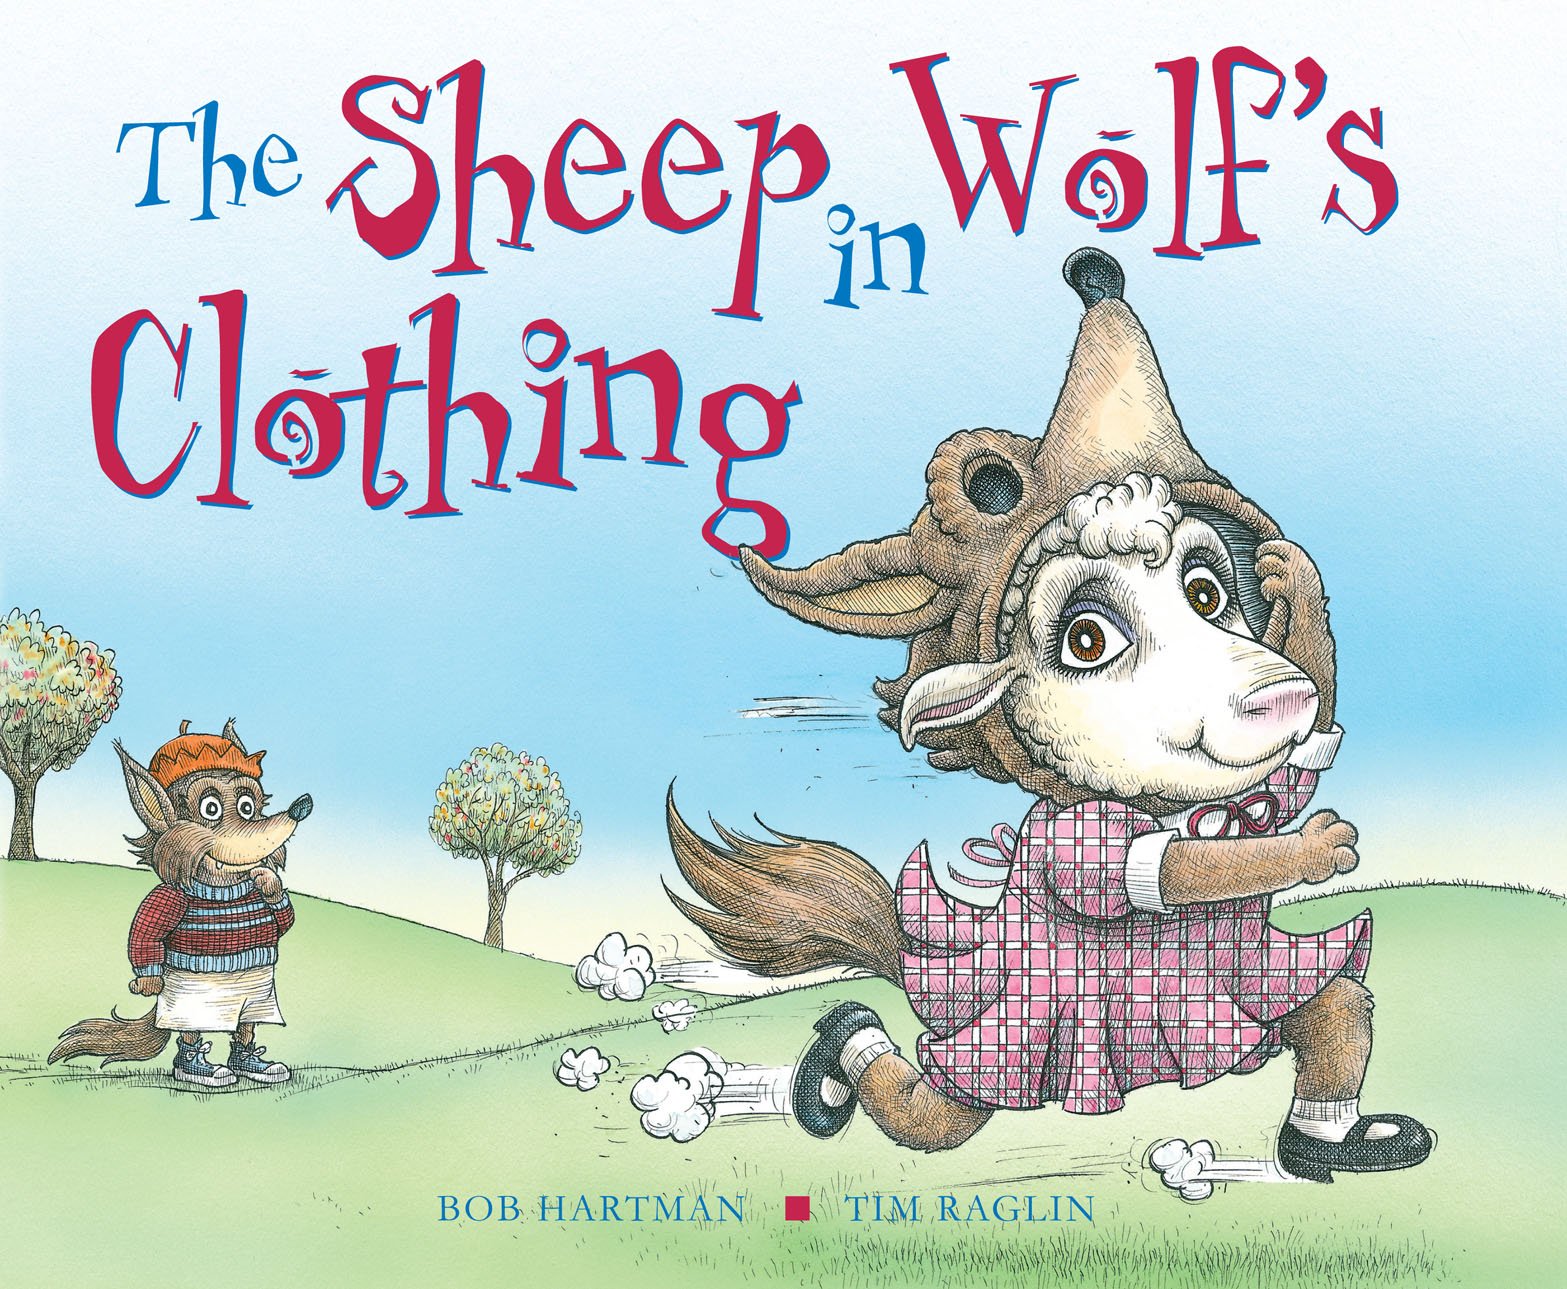 IMG : The Sheep in Wolf's Clothing